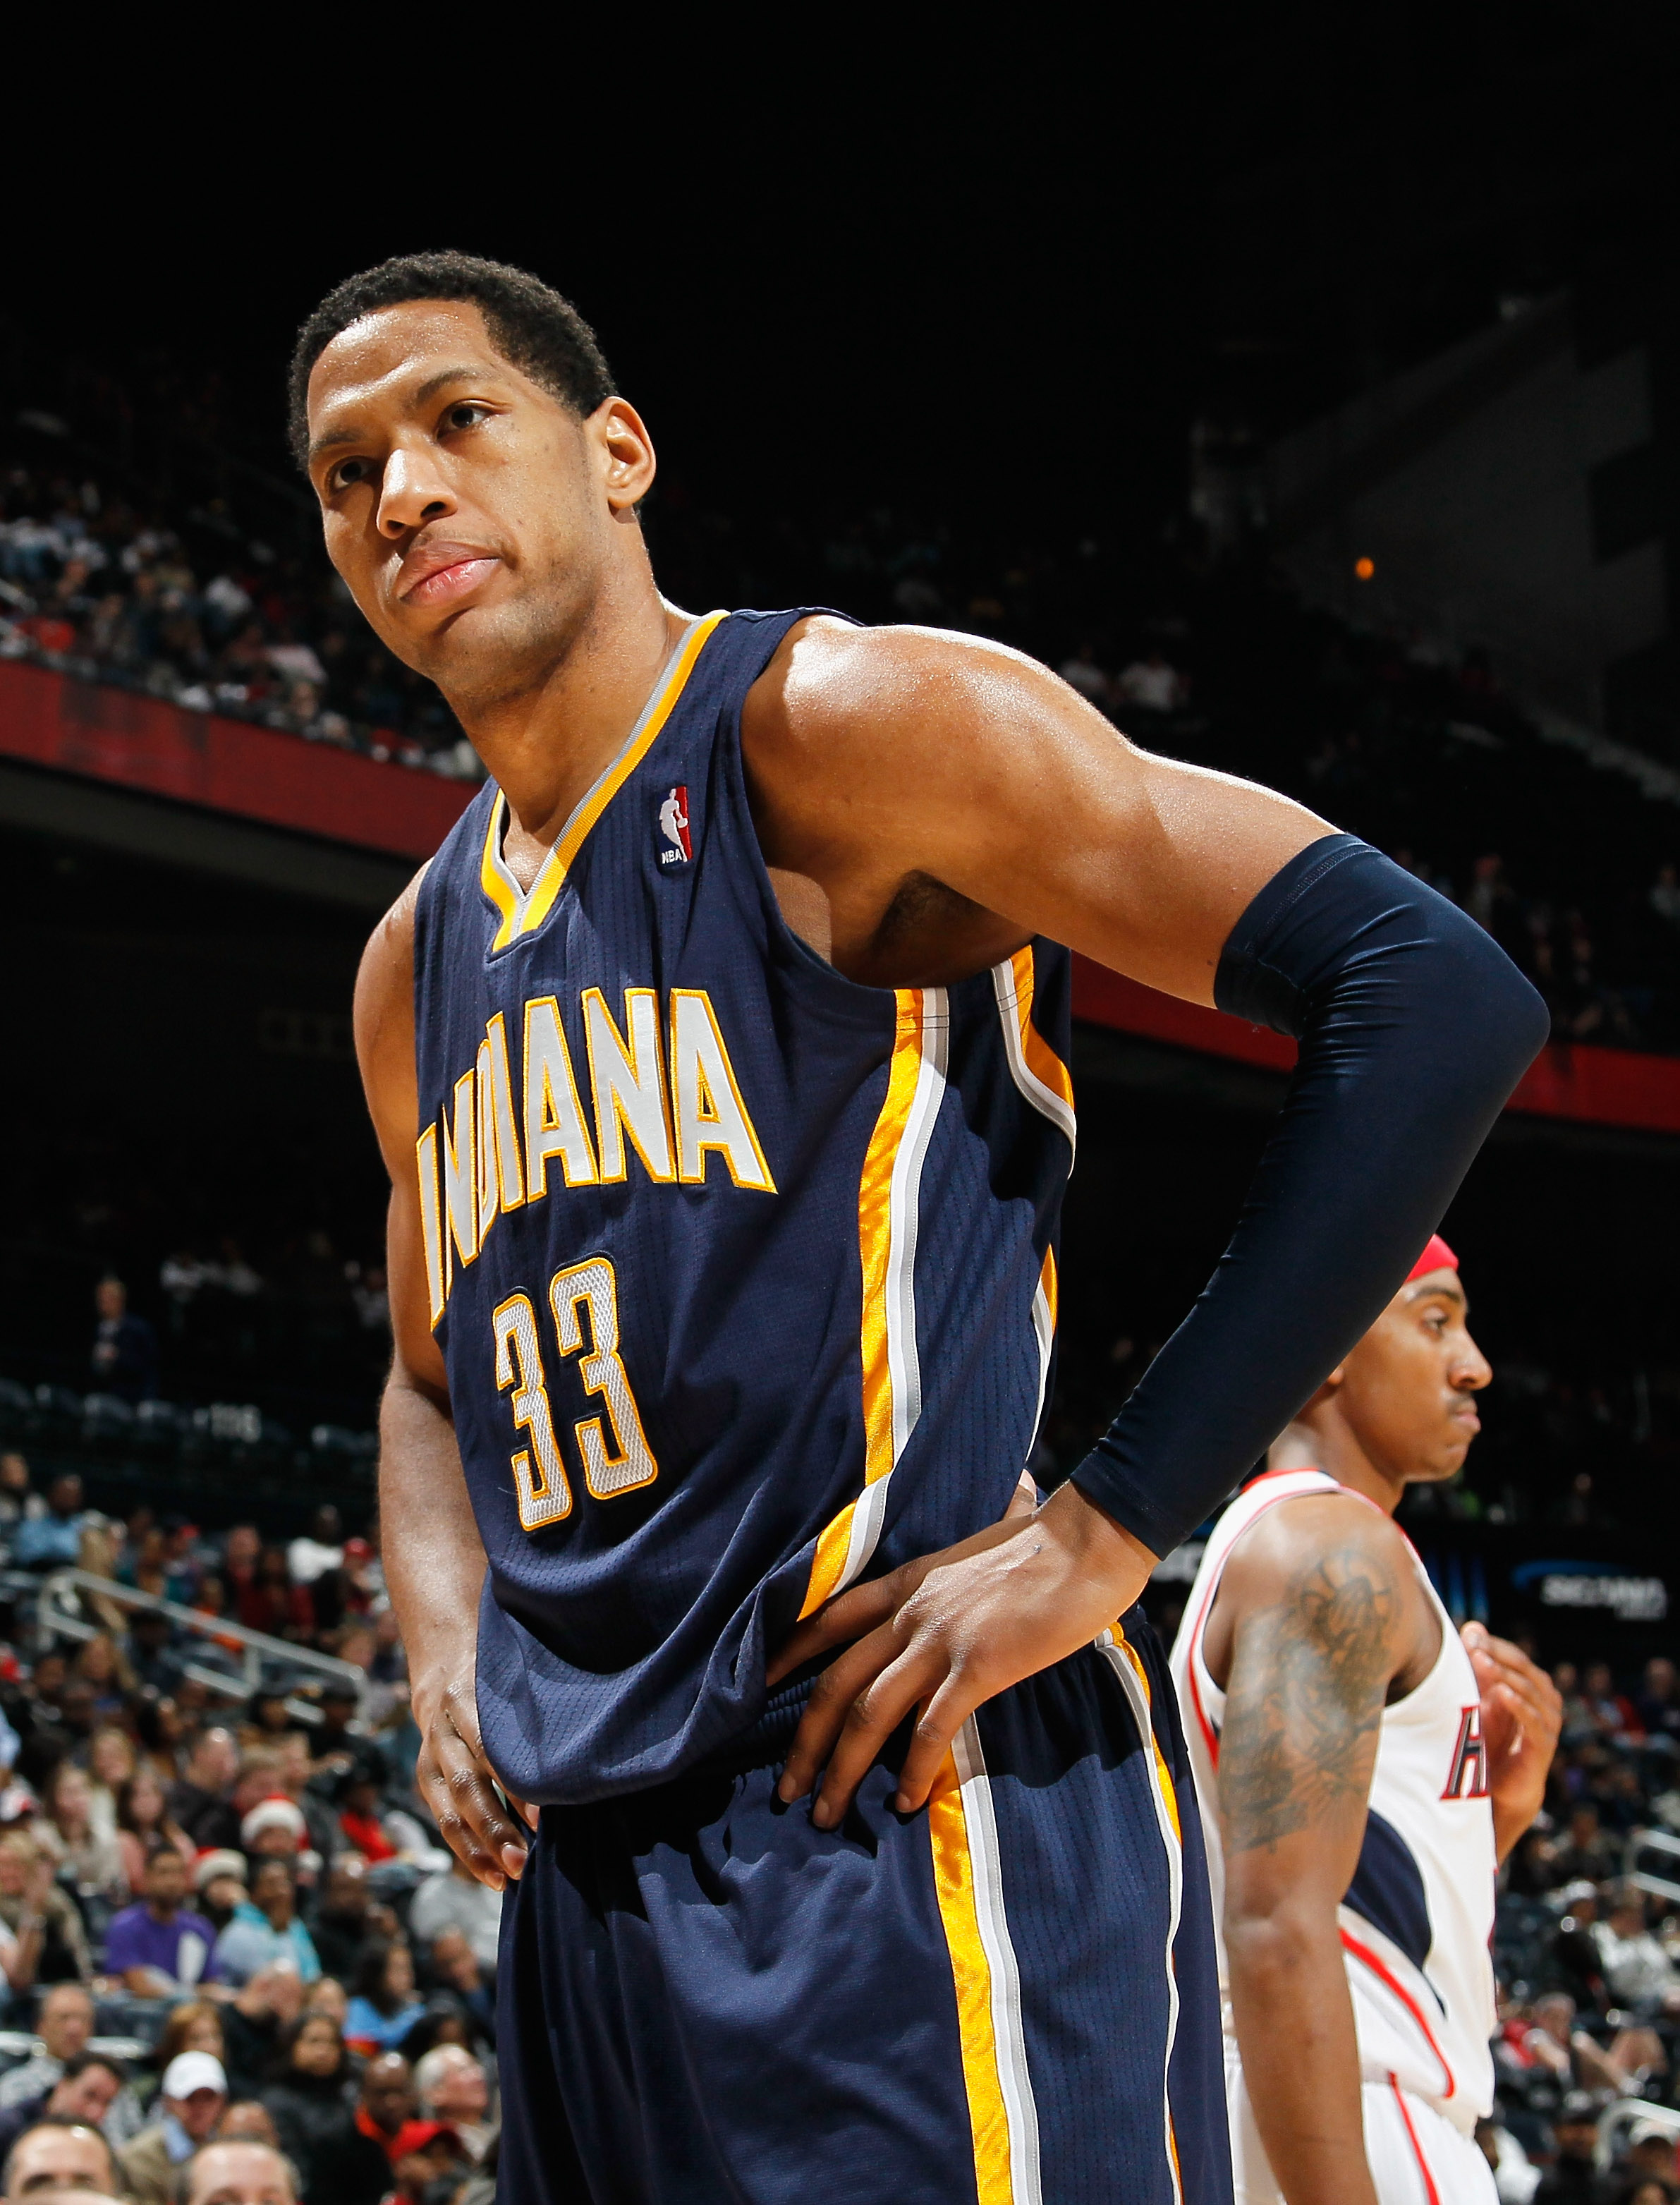 ATLANTA, GA - DECEMBER 11:  Danny Granger #33 of the Indiana Pacers reacts after not drawing a foul from the Atlanta Hawks at Philips Arena on December 11, 2010 in Atlanta, Georgia.  NOTE TO USER: User expressly acknowledges and agrees that, by downloadin